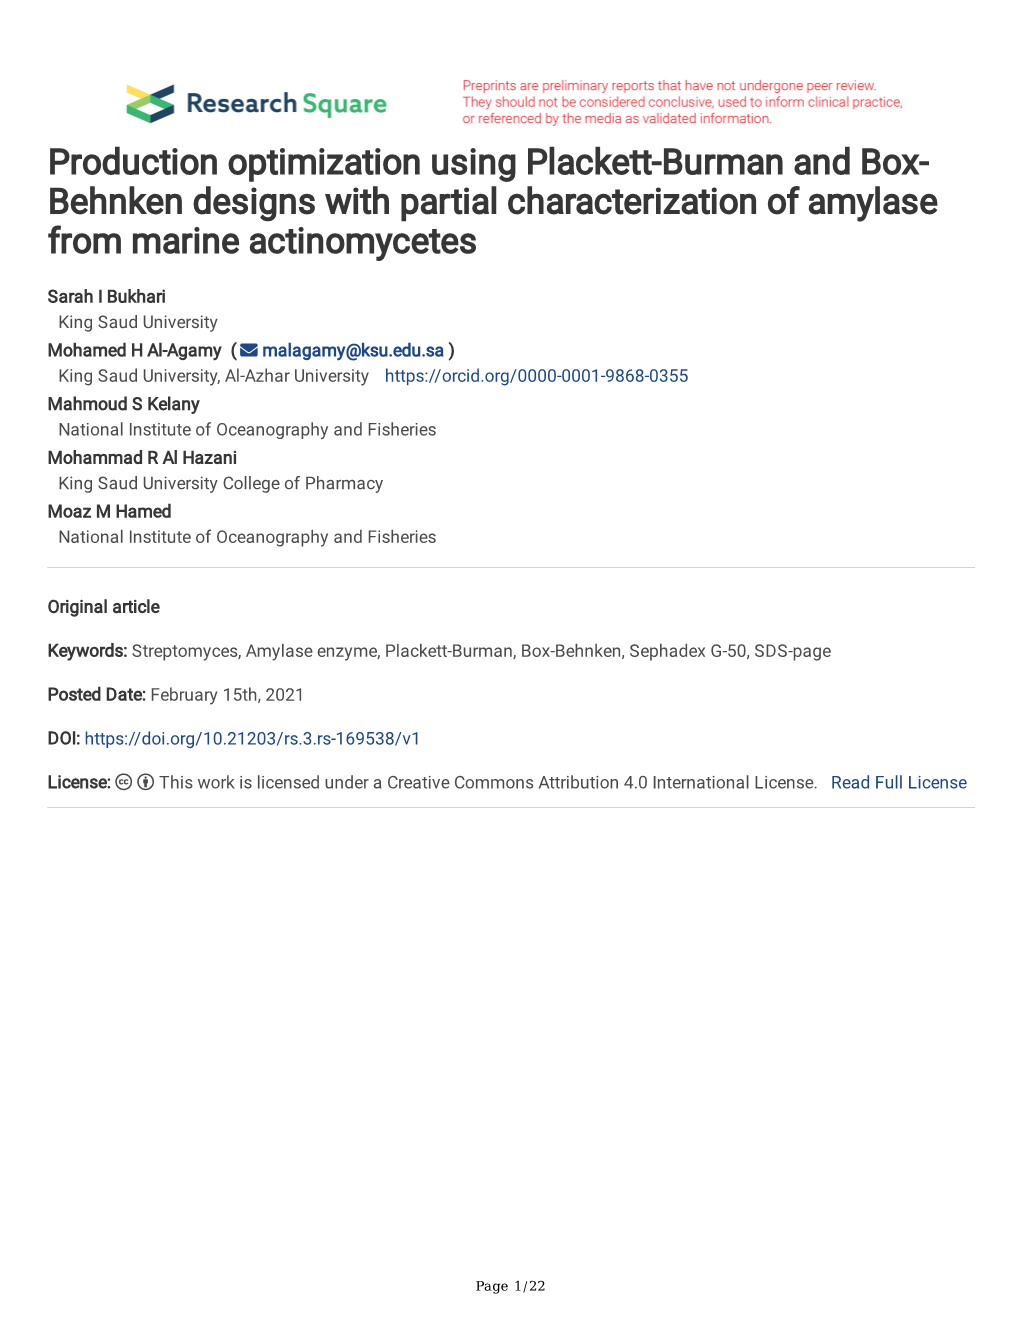 Production Optimization Using Plackett-Burman and Box- Behnken Designs with Partial Characterization of Amylase from Marine Actinomycetes